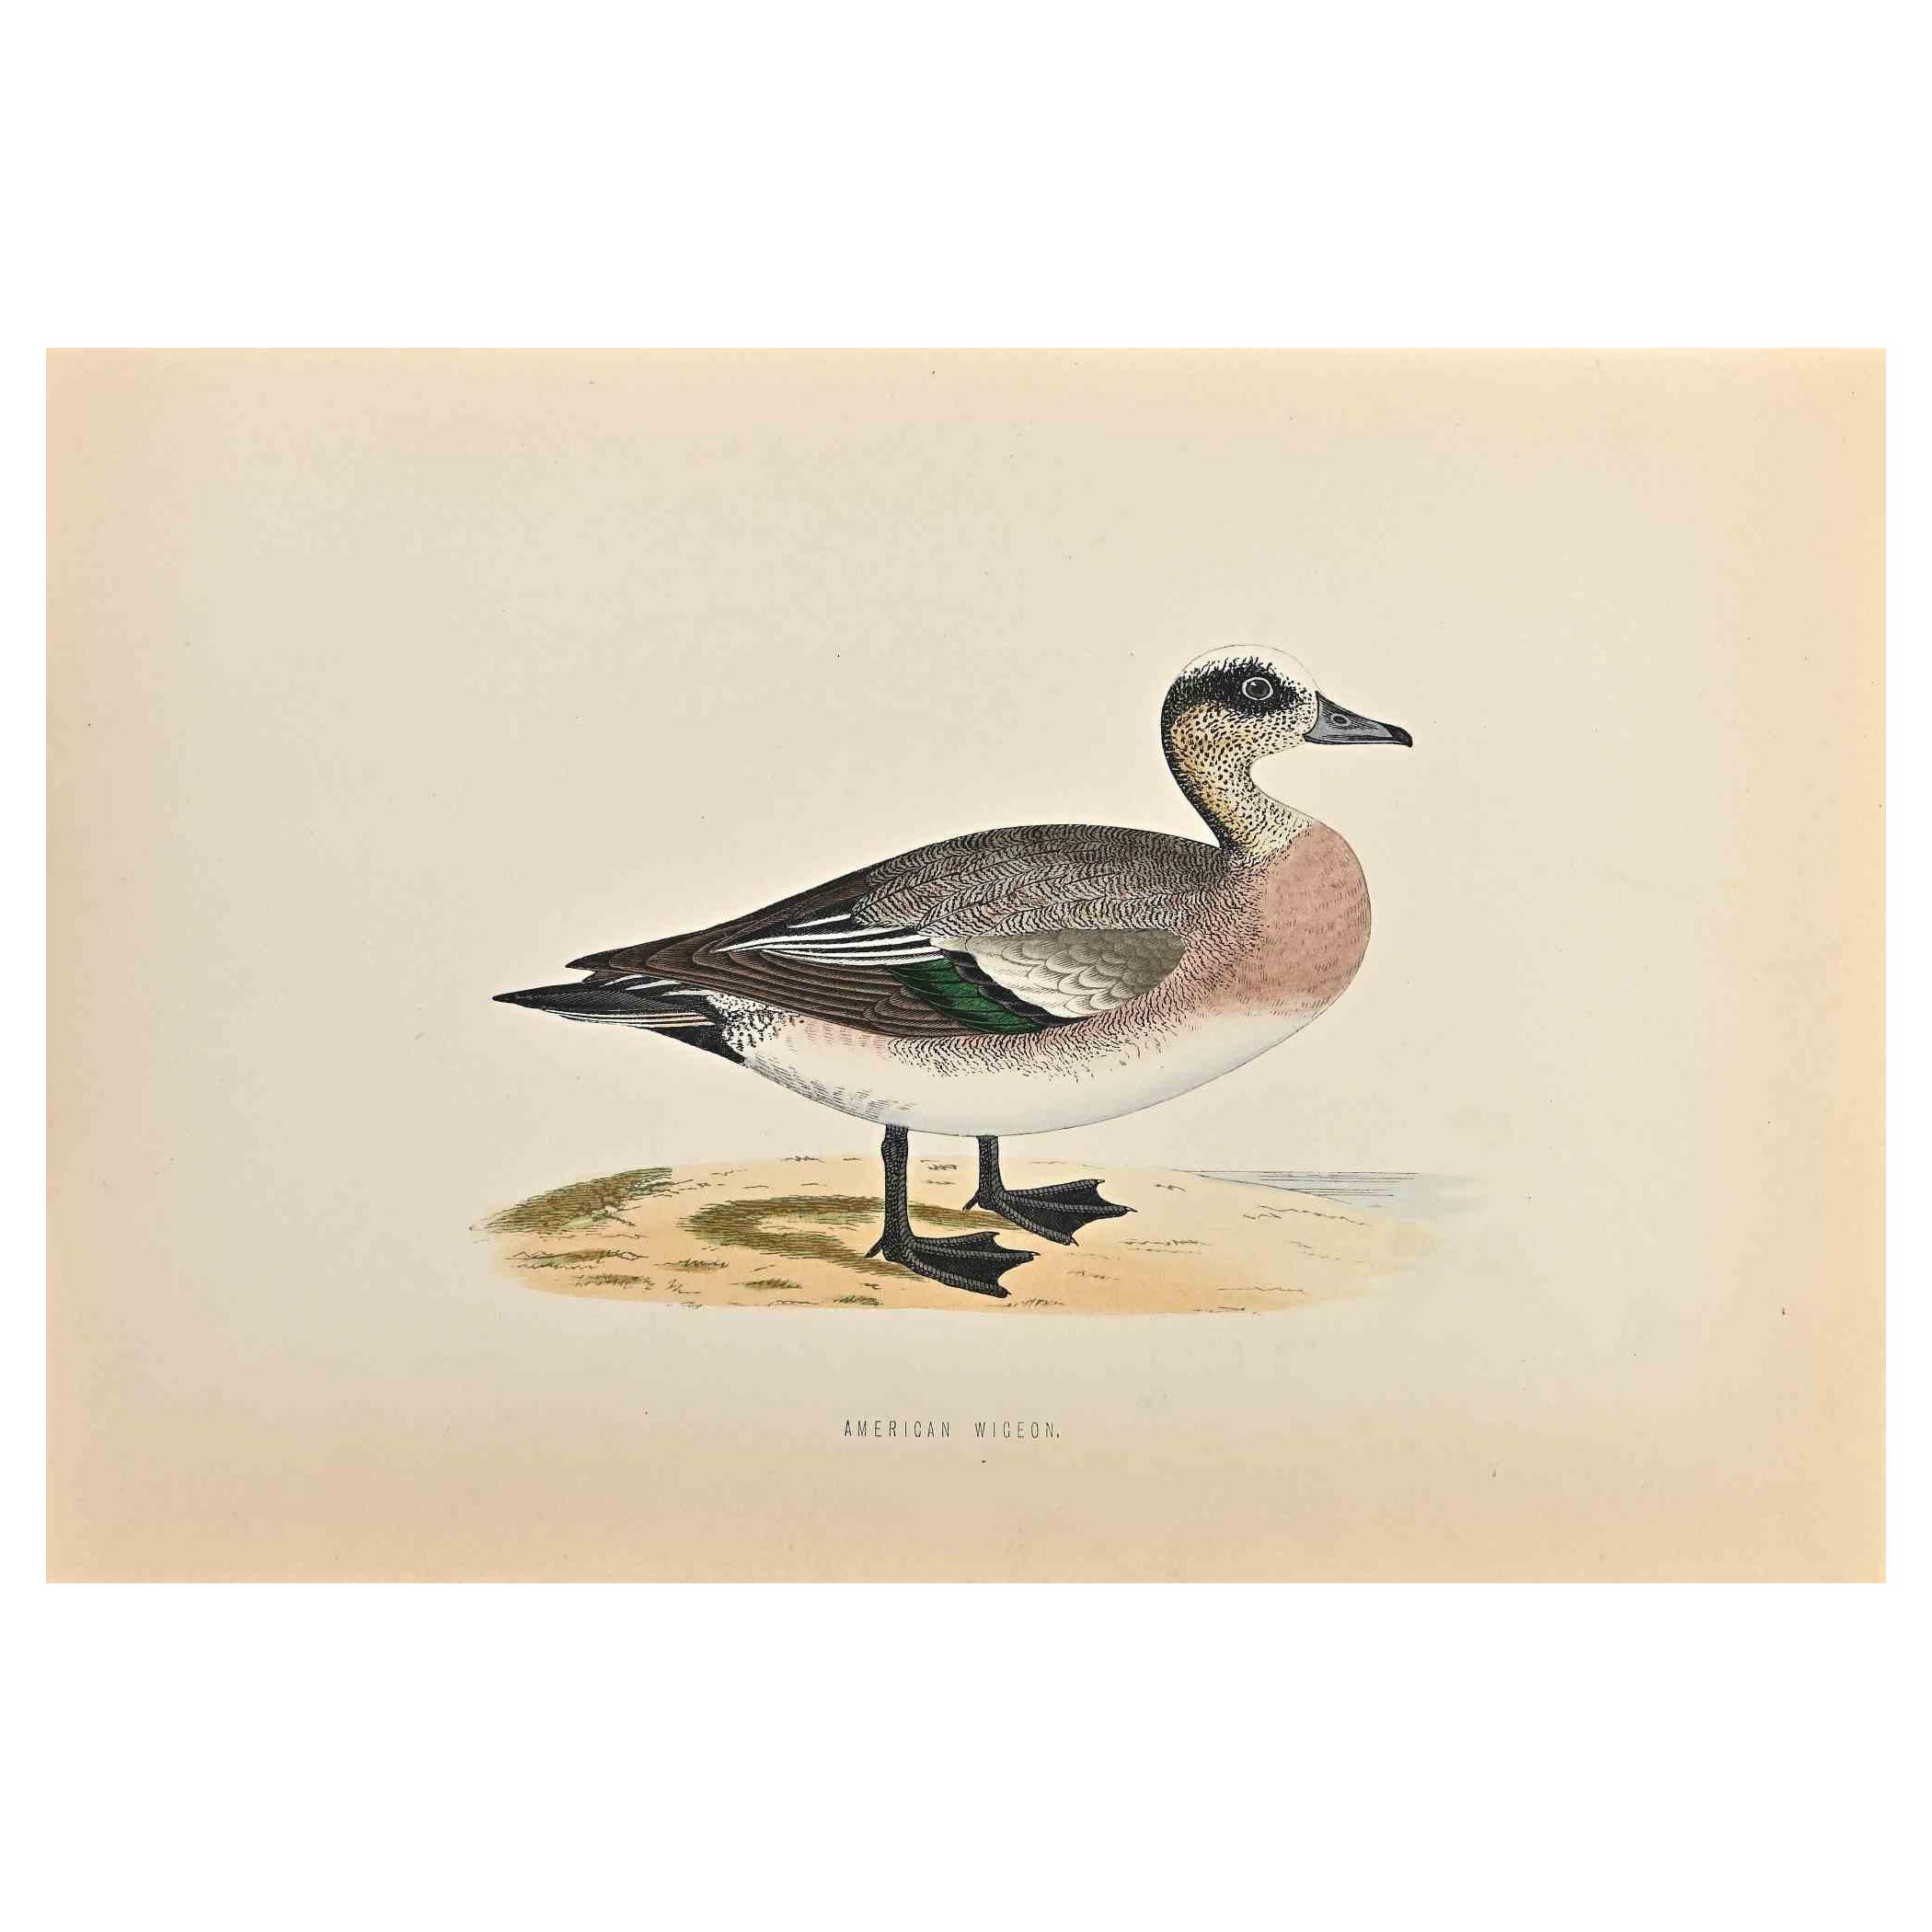 American Wigeon is a modern artwork realized in 1870 by the British artist Alexander Francis Lydon (1836-1917). 

Woodcut print on ivory-colored paper.

Hand-colored, published by London, Bell & Sons, 1870.  

The name of the bird is printed on the